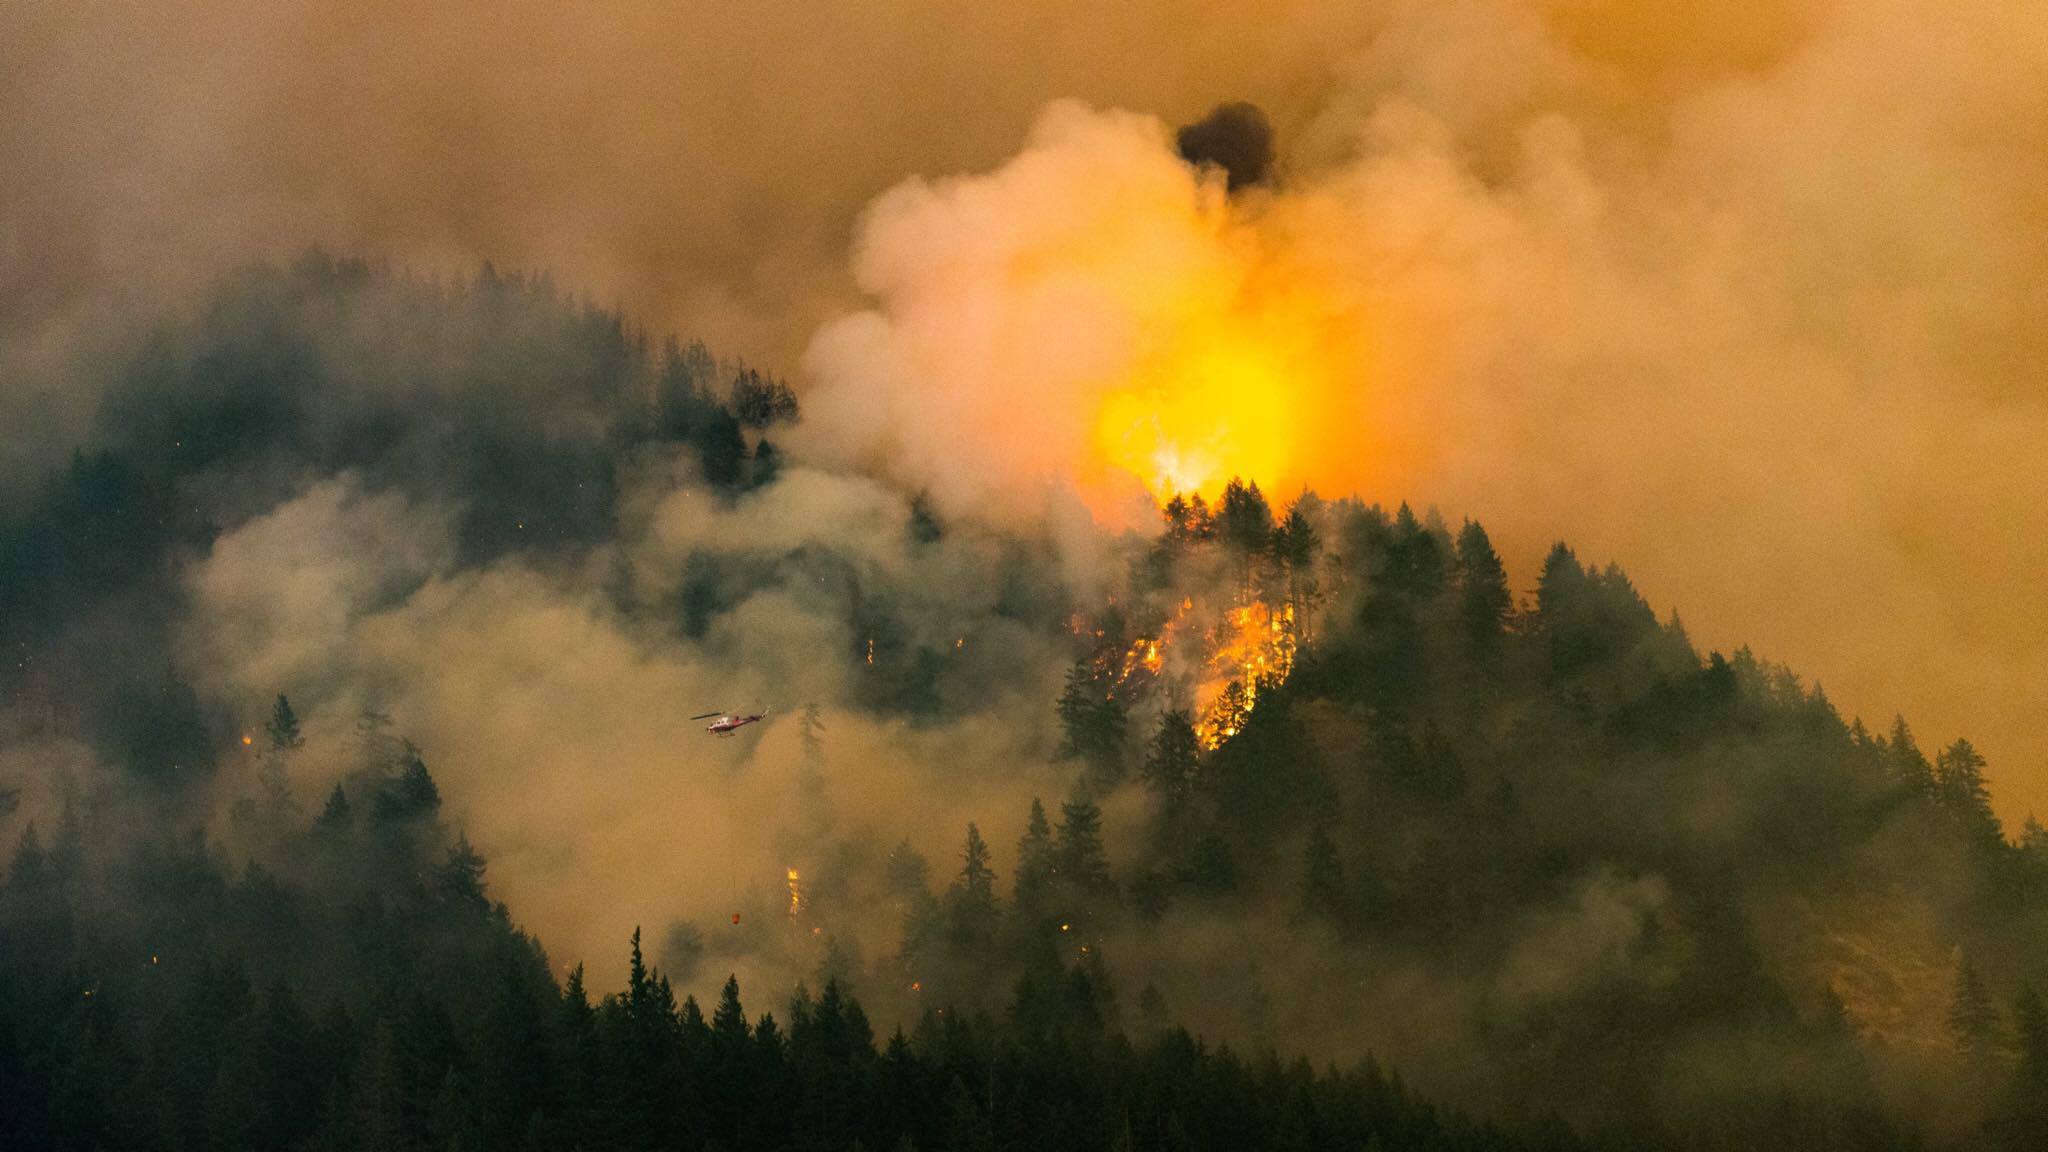 A helicopter fights the Eagle Creek Fire in Oregon on Monday as seen from the Bonneville Dam area Monday night.